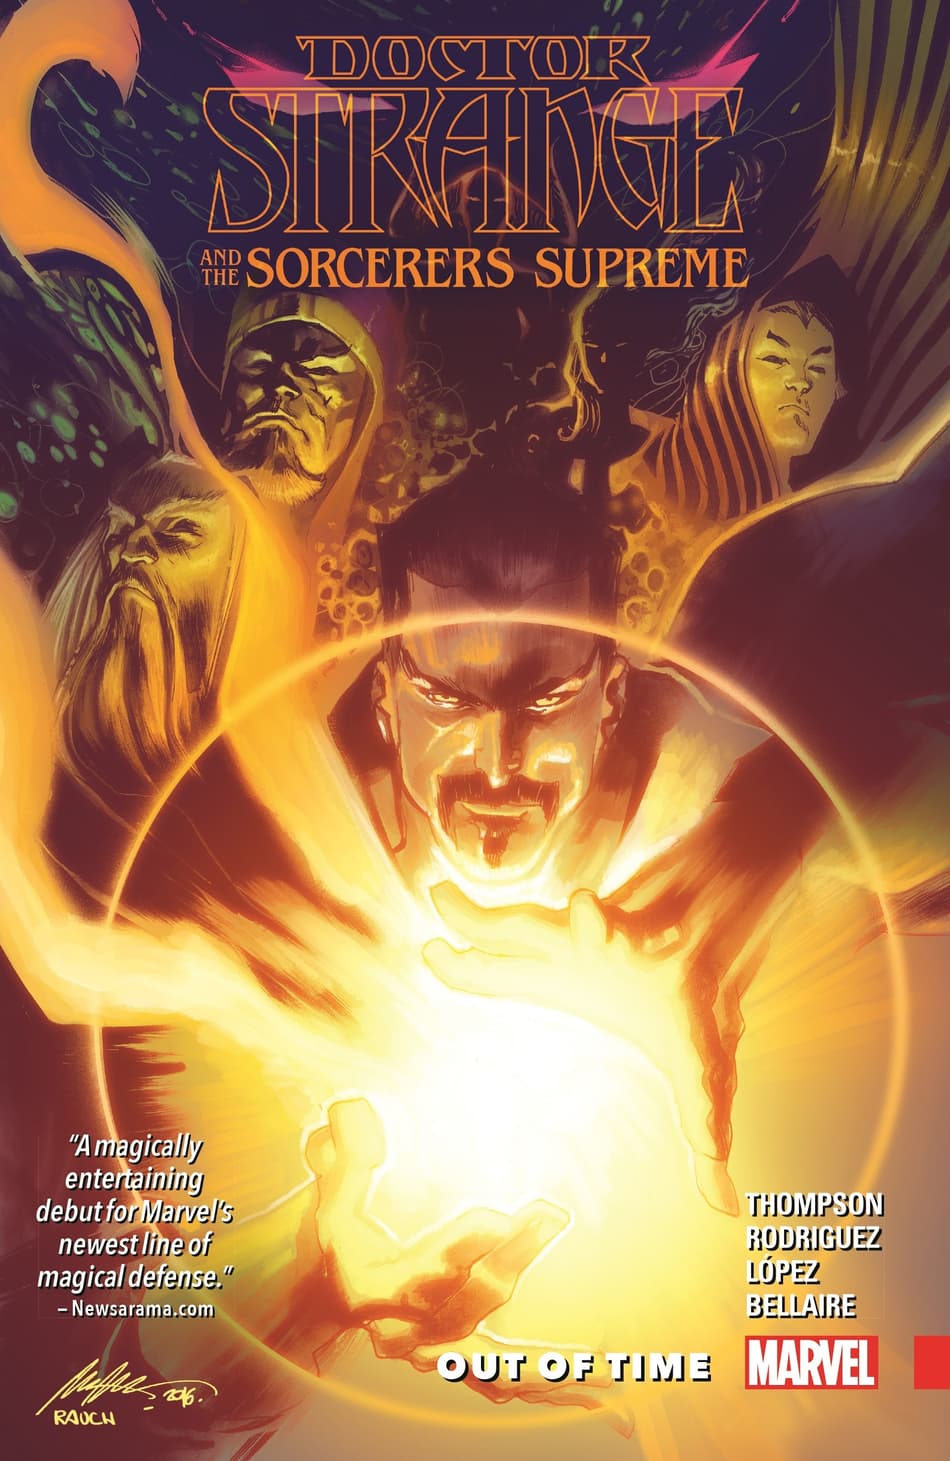 Cover to DOCTOR STRANGE AND THE SORCERERS SUPREME VOL. 1: OUT OF TIME.